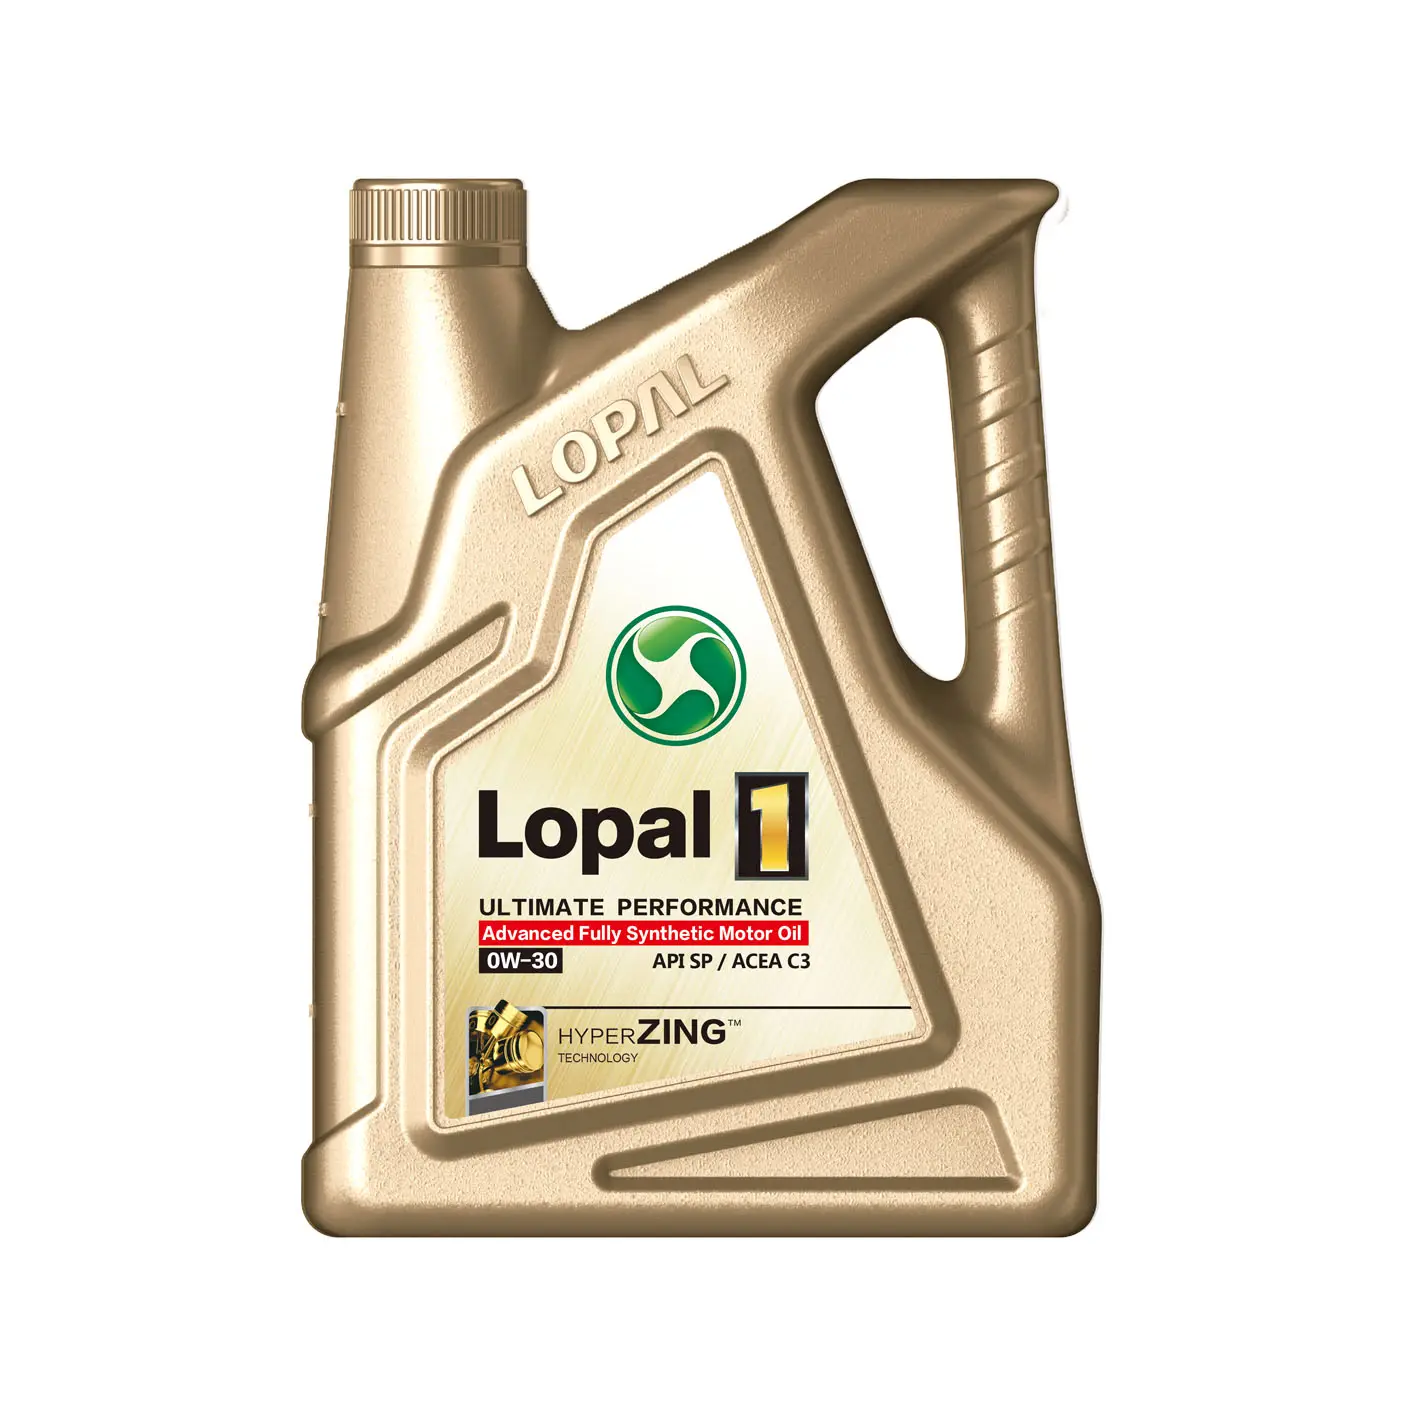 Lopal 1 advance fully synthetic series. Lopal 1. Lopal 1 Smart European Series 5w-30. Lopal 1 Advanced. Lopal 0w20.